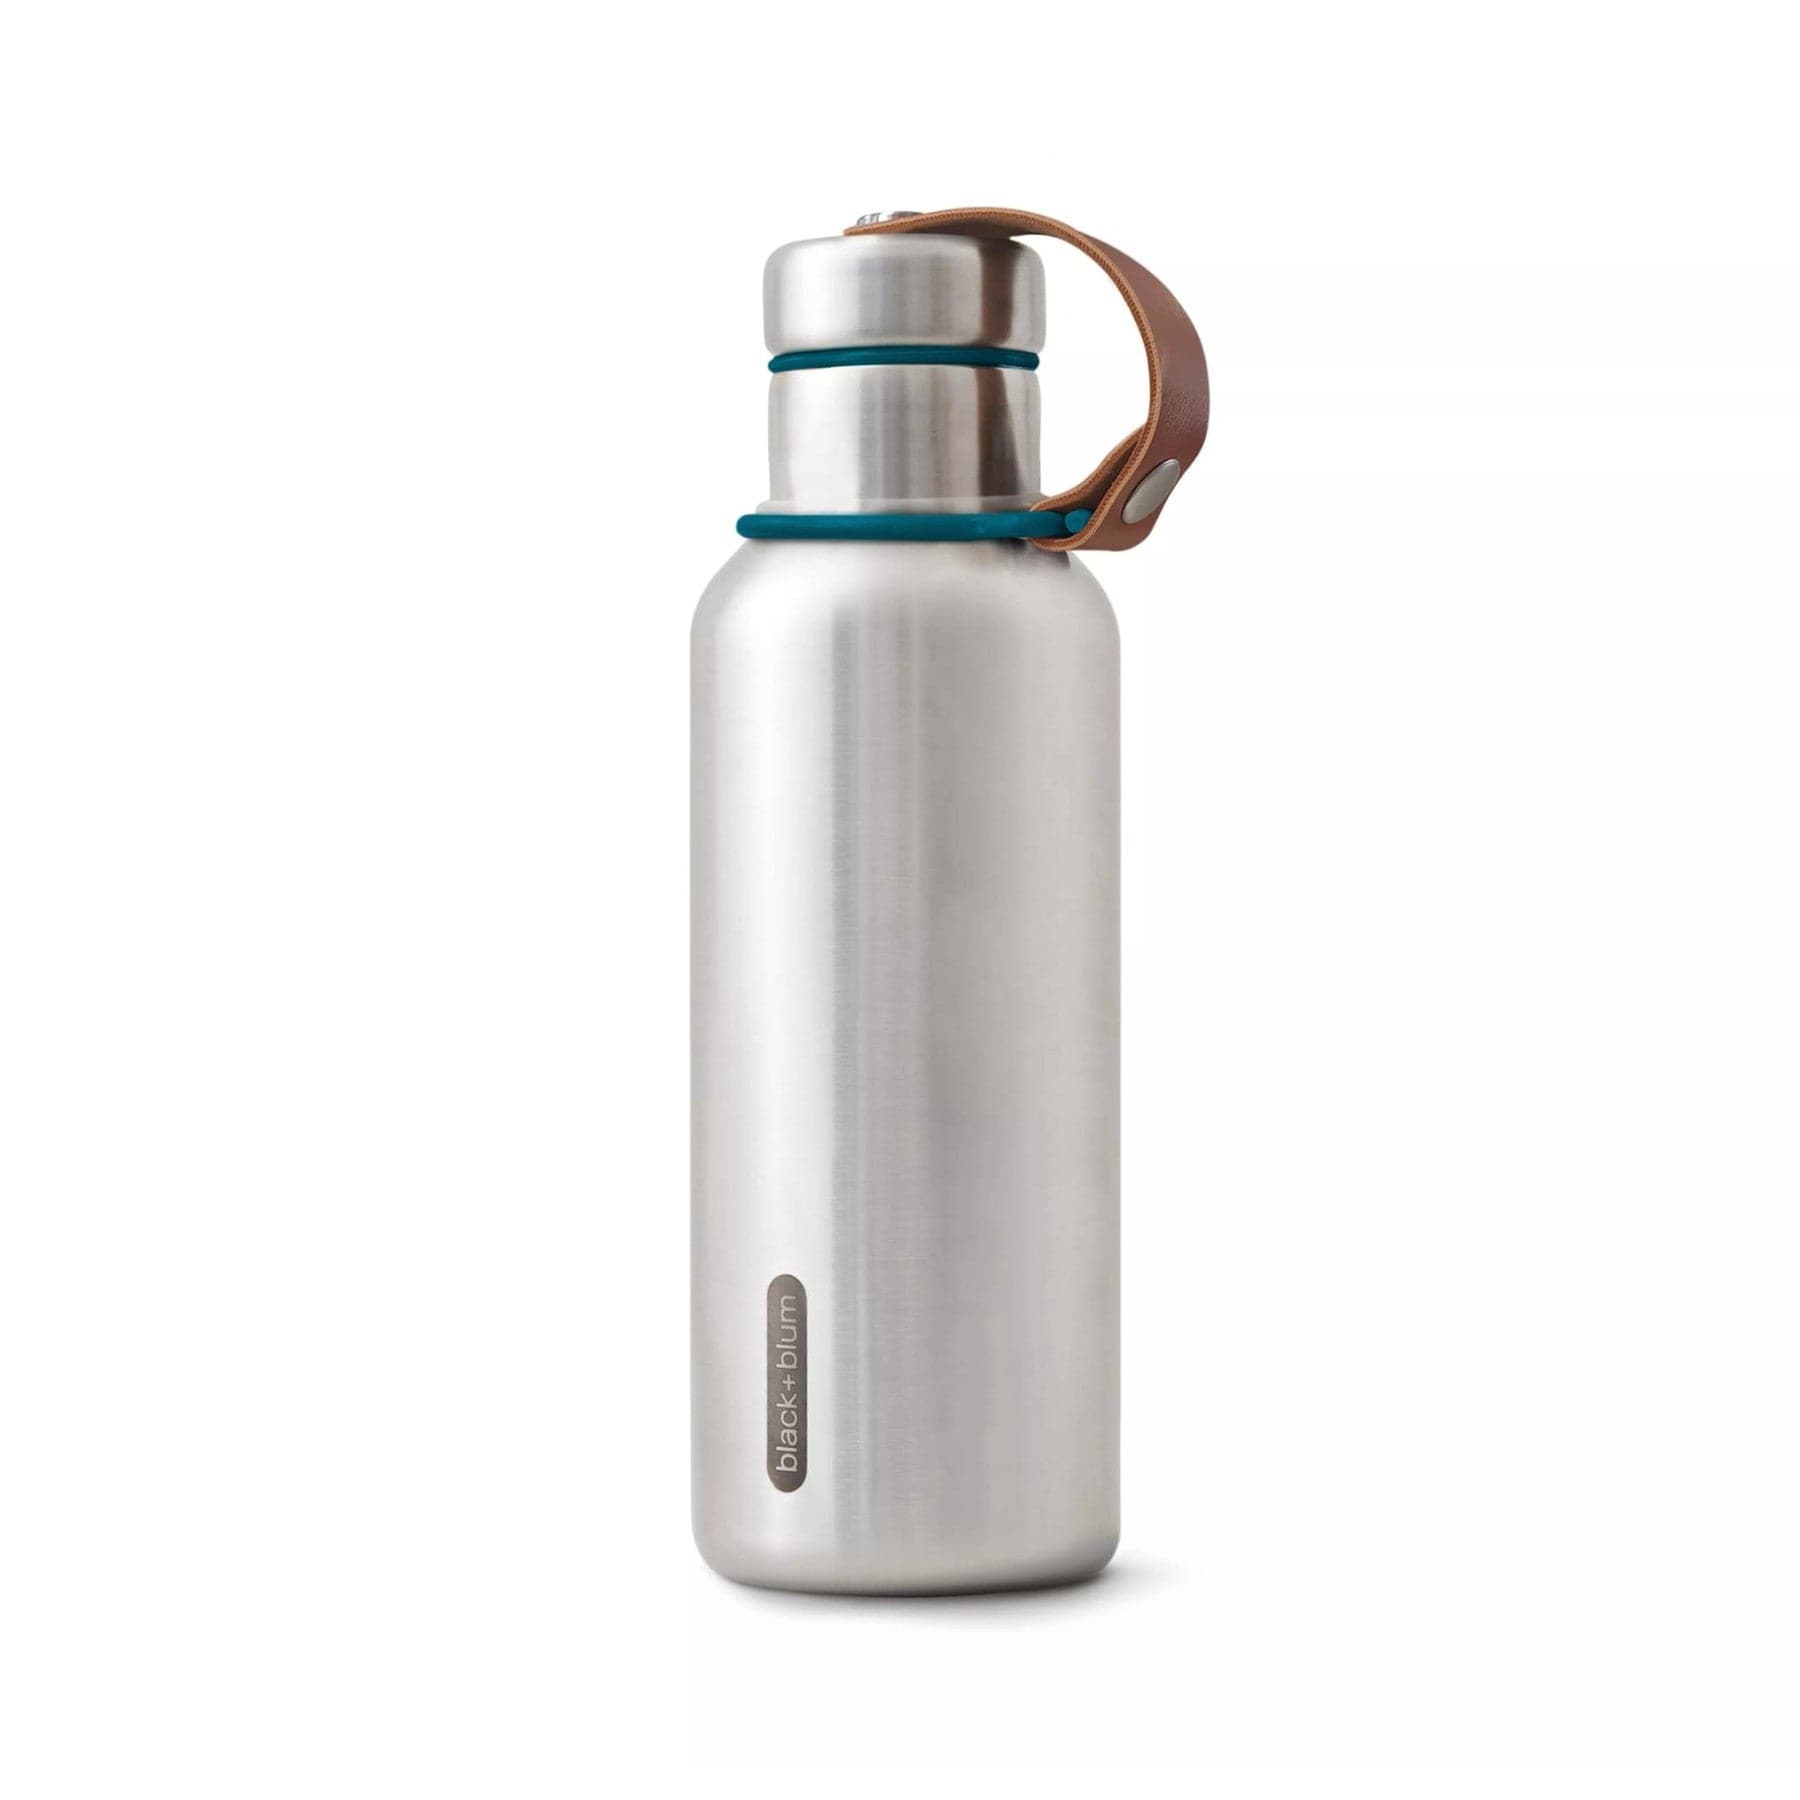 Stainless steel insulated water bottle with leather carrying loop and teal silicone accents on white background